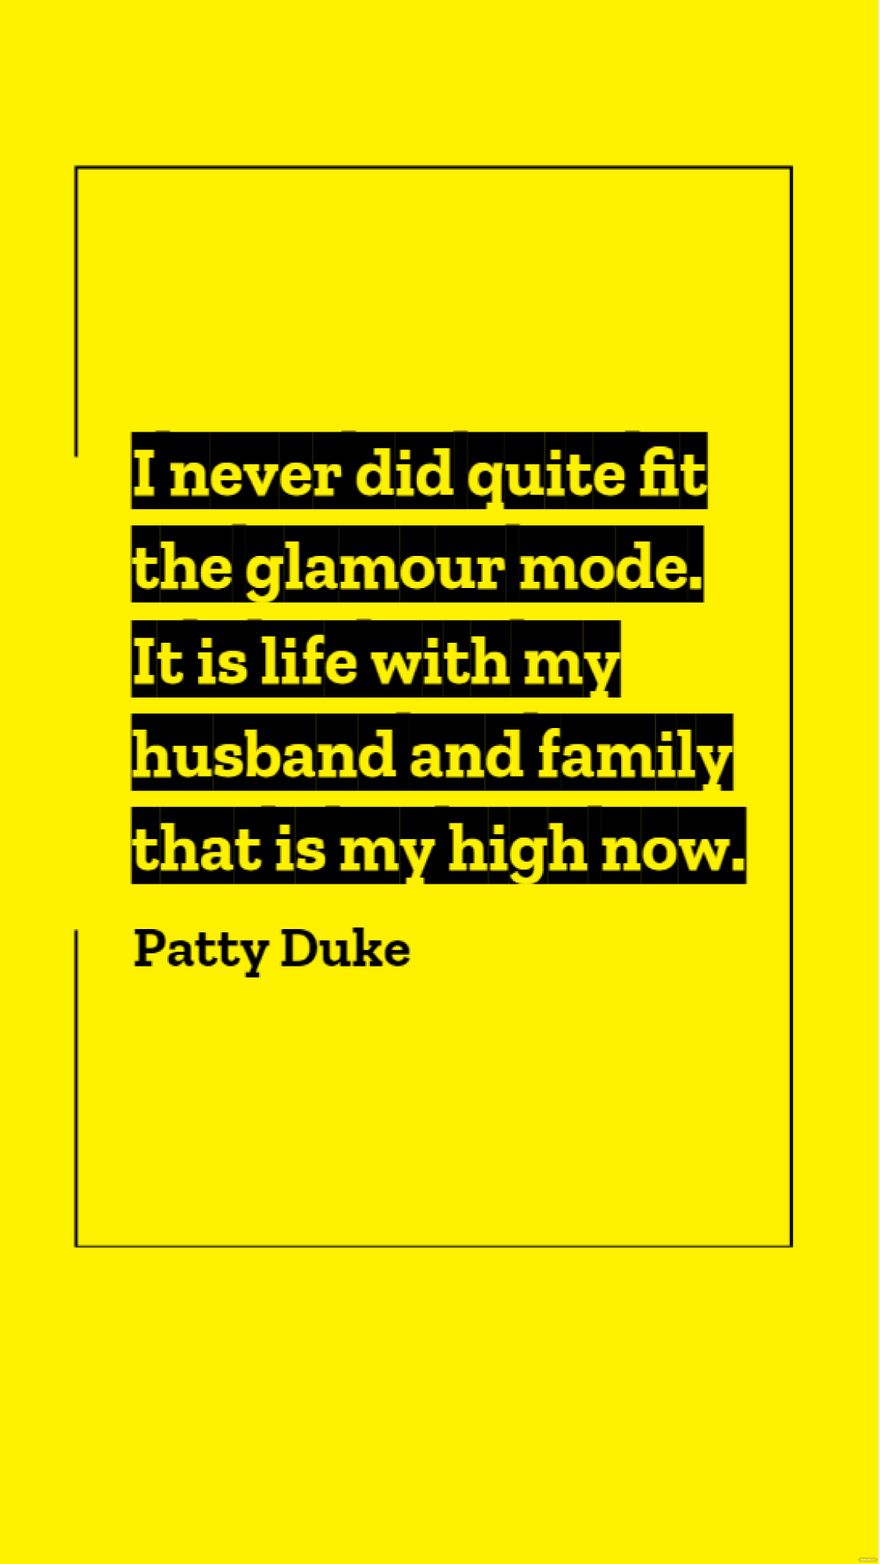 Patty Duke - I never did quite fit the glamour mode. It is life with my husband and family that is my high now.